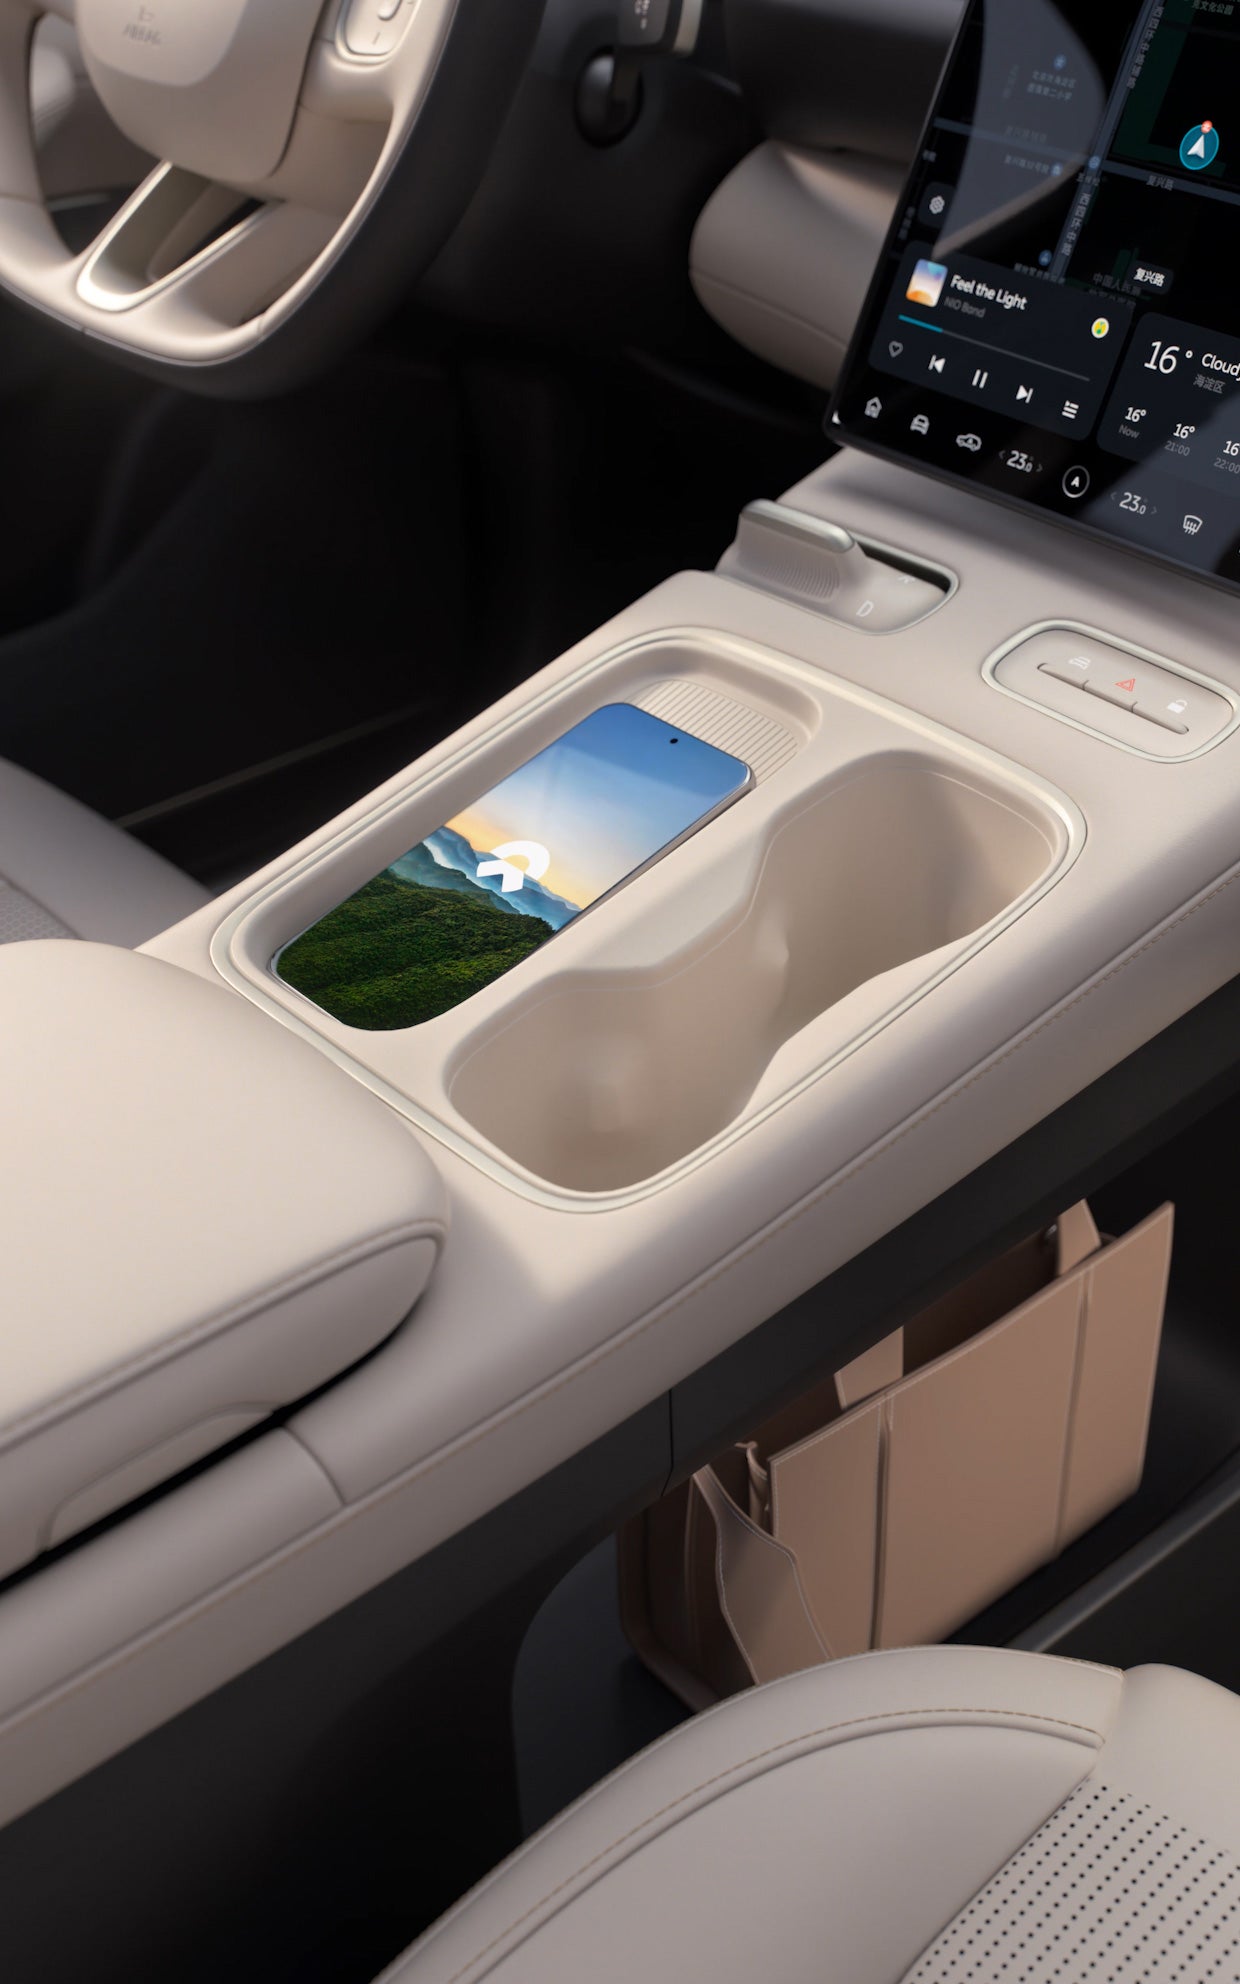 Wireless Charging The little conveniences matter when lived with everyday. Placed next to the driver, the 40W wireless charging pad will charge mobile devices during the journey.